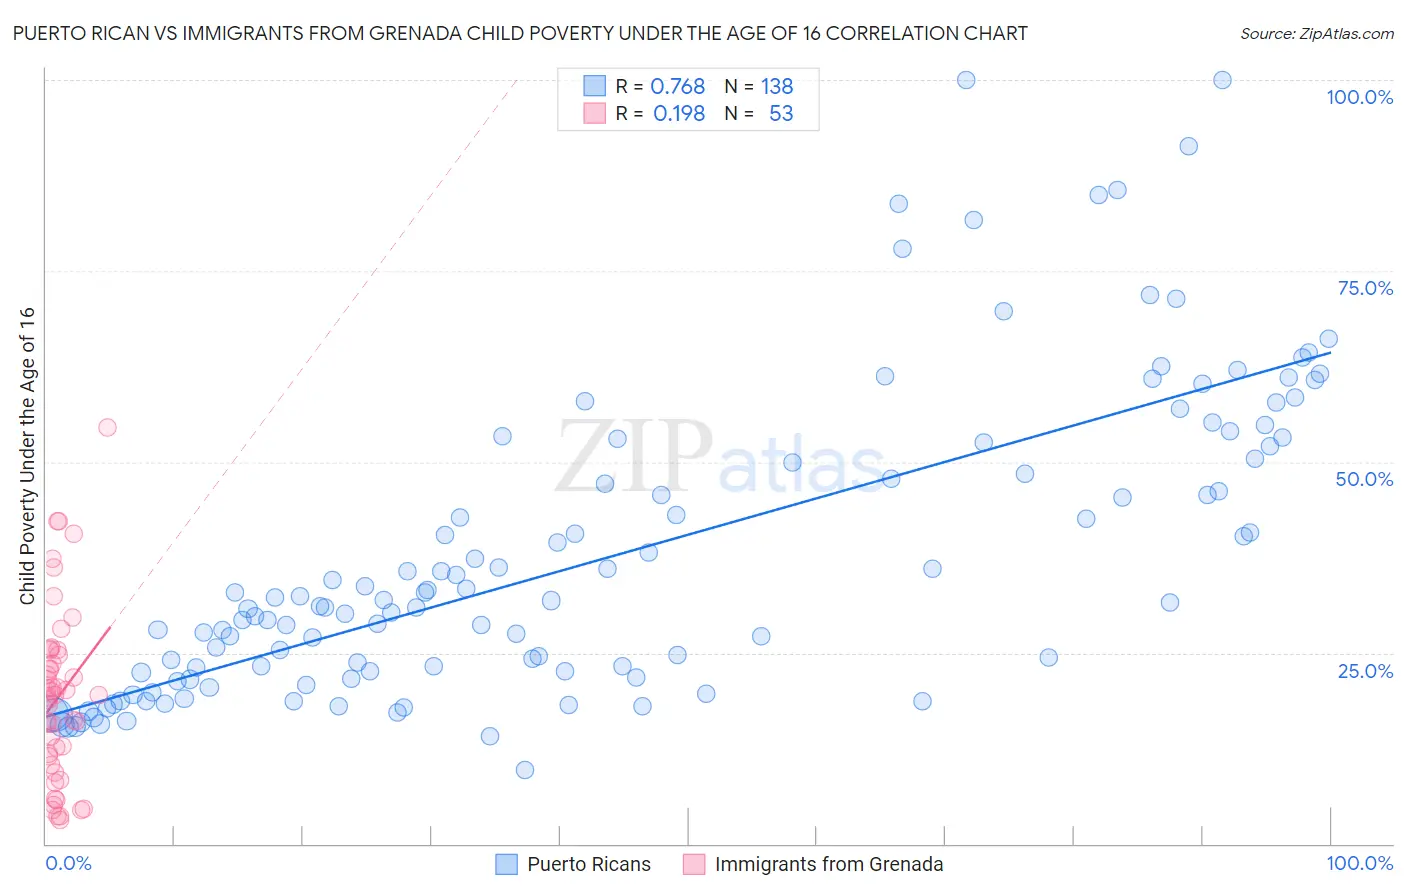 Puerto Rican vs Immigrants from Grenada Child Poverty Under the Age of 16